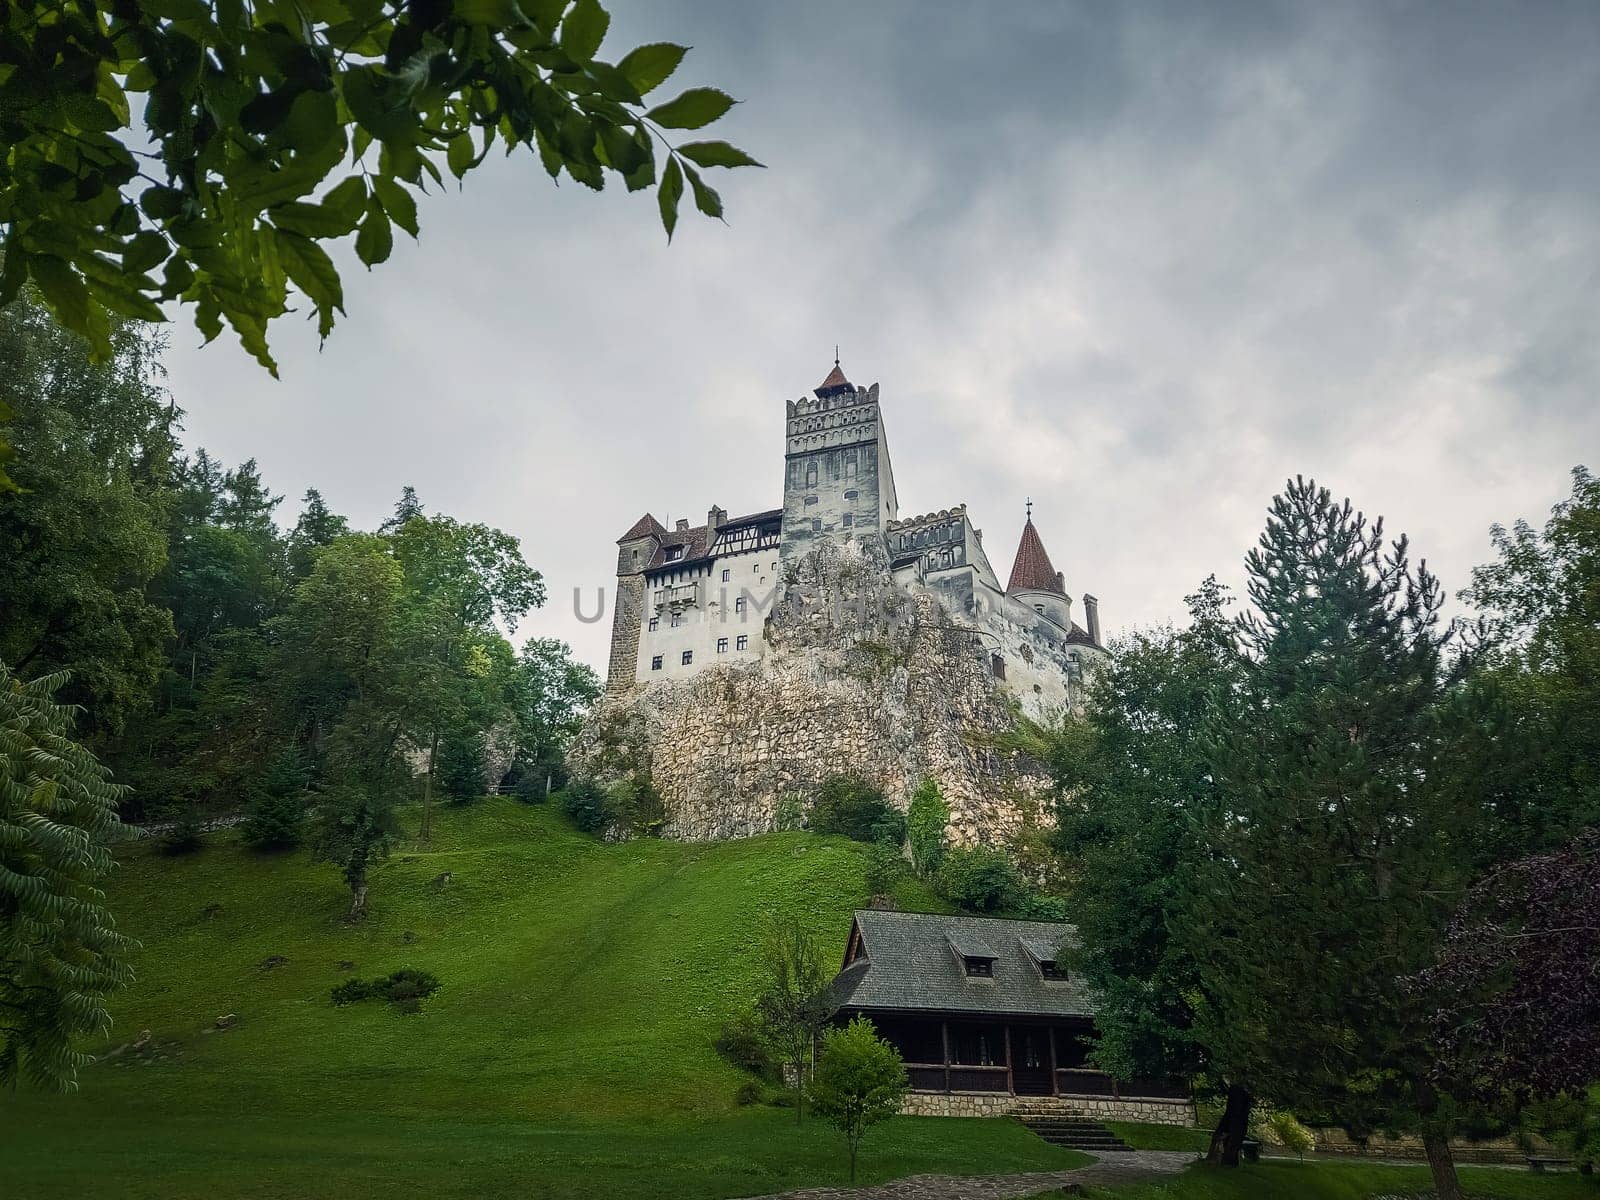 The medieval Bran fortress known as Dracula castle in Transylvania, Romania. Historical saxon style stronghold in the heart of Carpathian mountains by psychoshadow